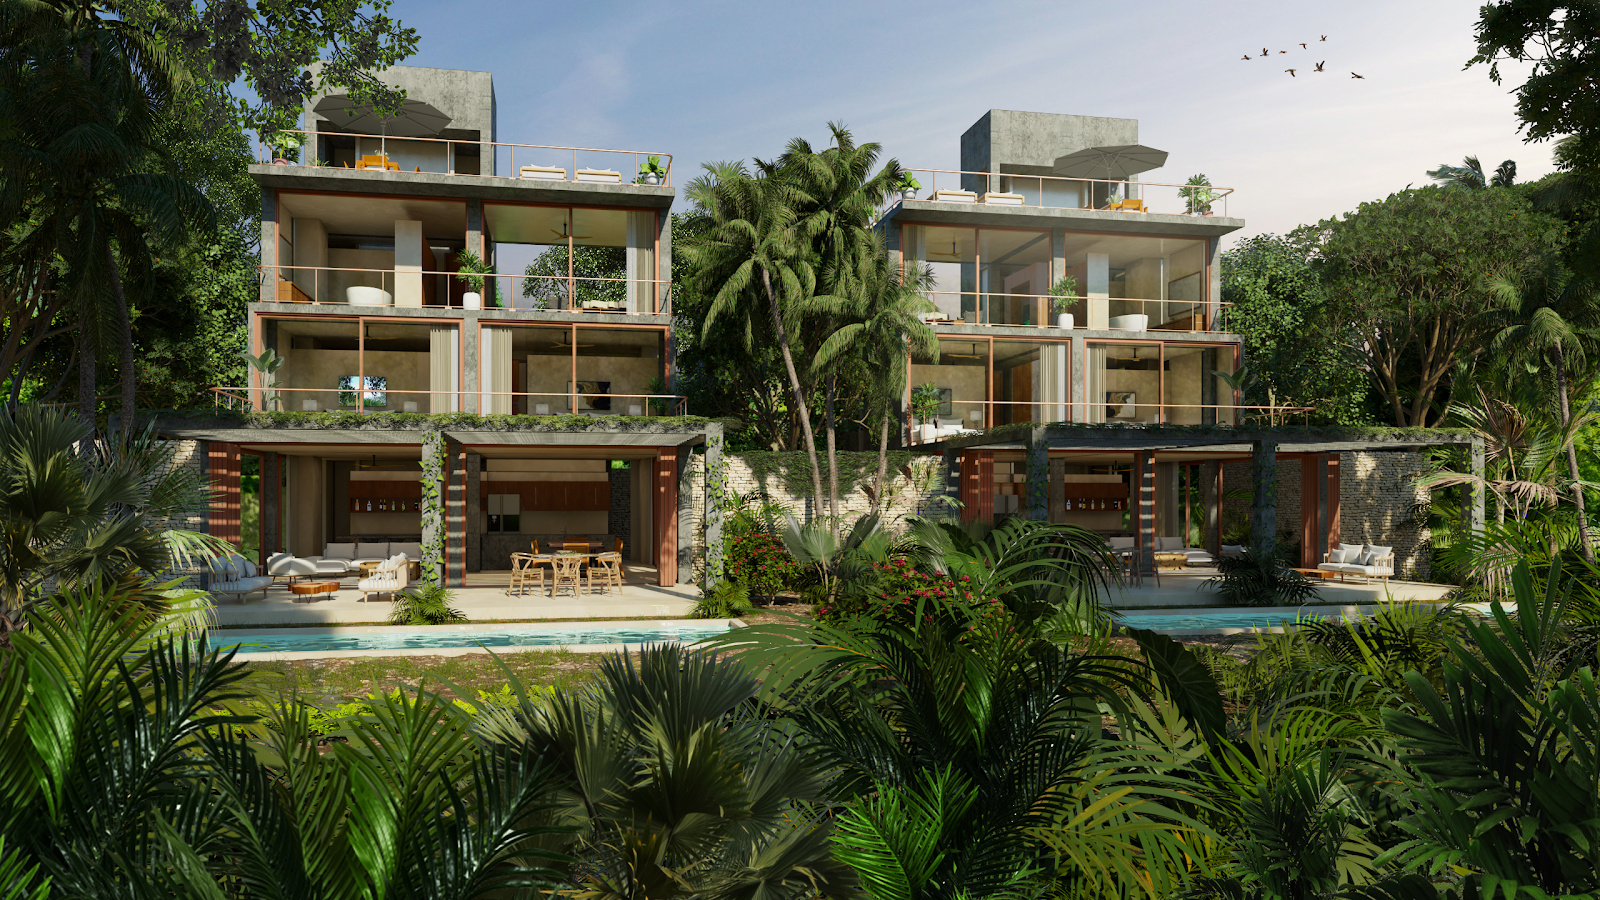 Stunning 3 BR Residence with Rooftop Oasis and Pool – Available Now in Tulum!